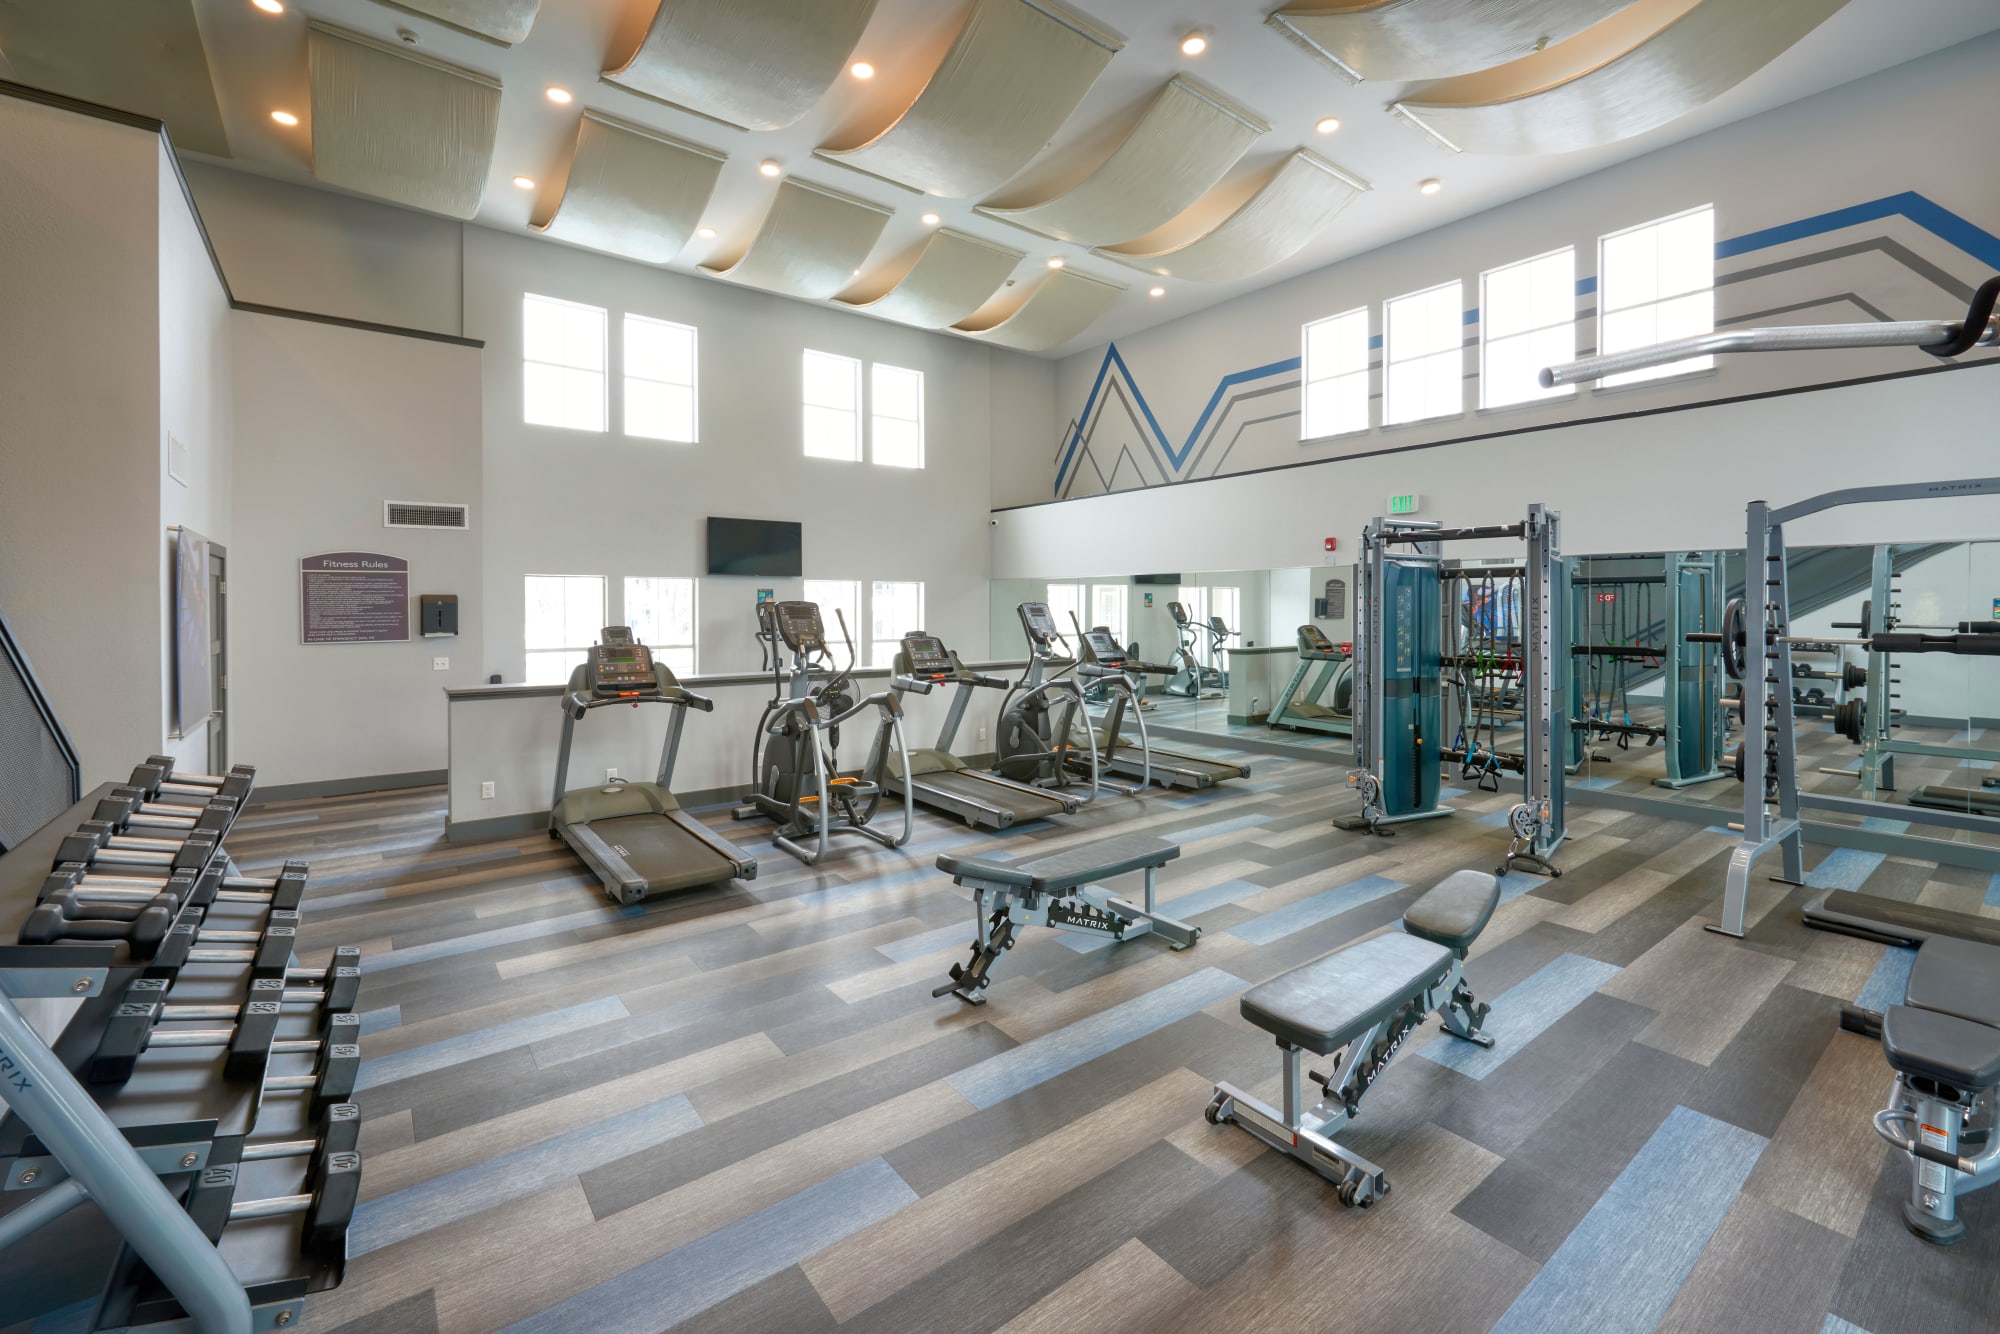 The fully-equipped gym at Altitude Westminster in Westminster, Colorado